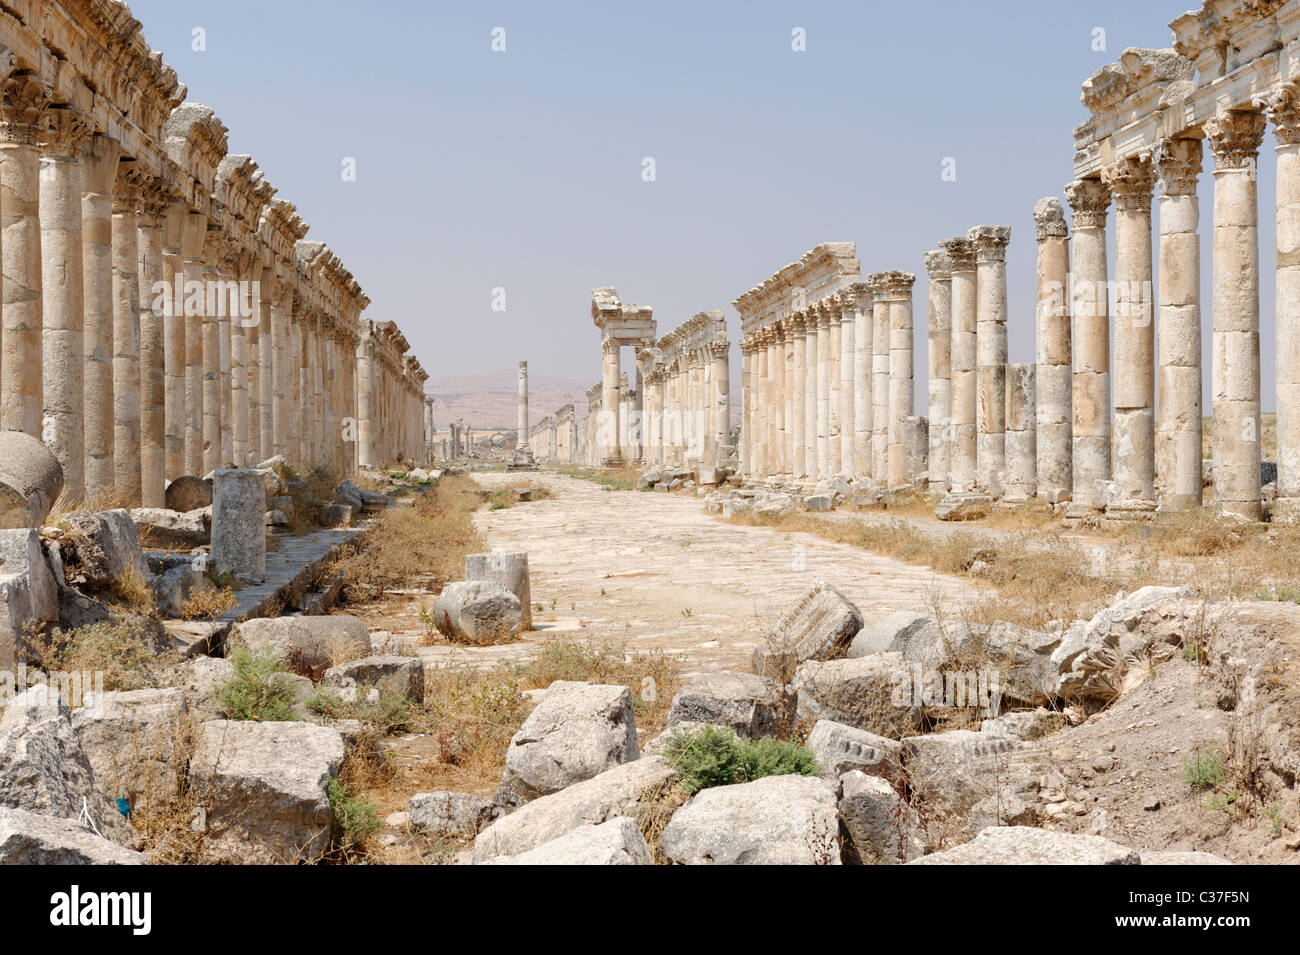 The majestic Colonnaded Street of the ancient Apamea in Syria. Stock Photo